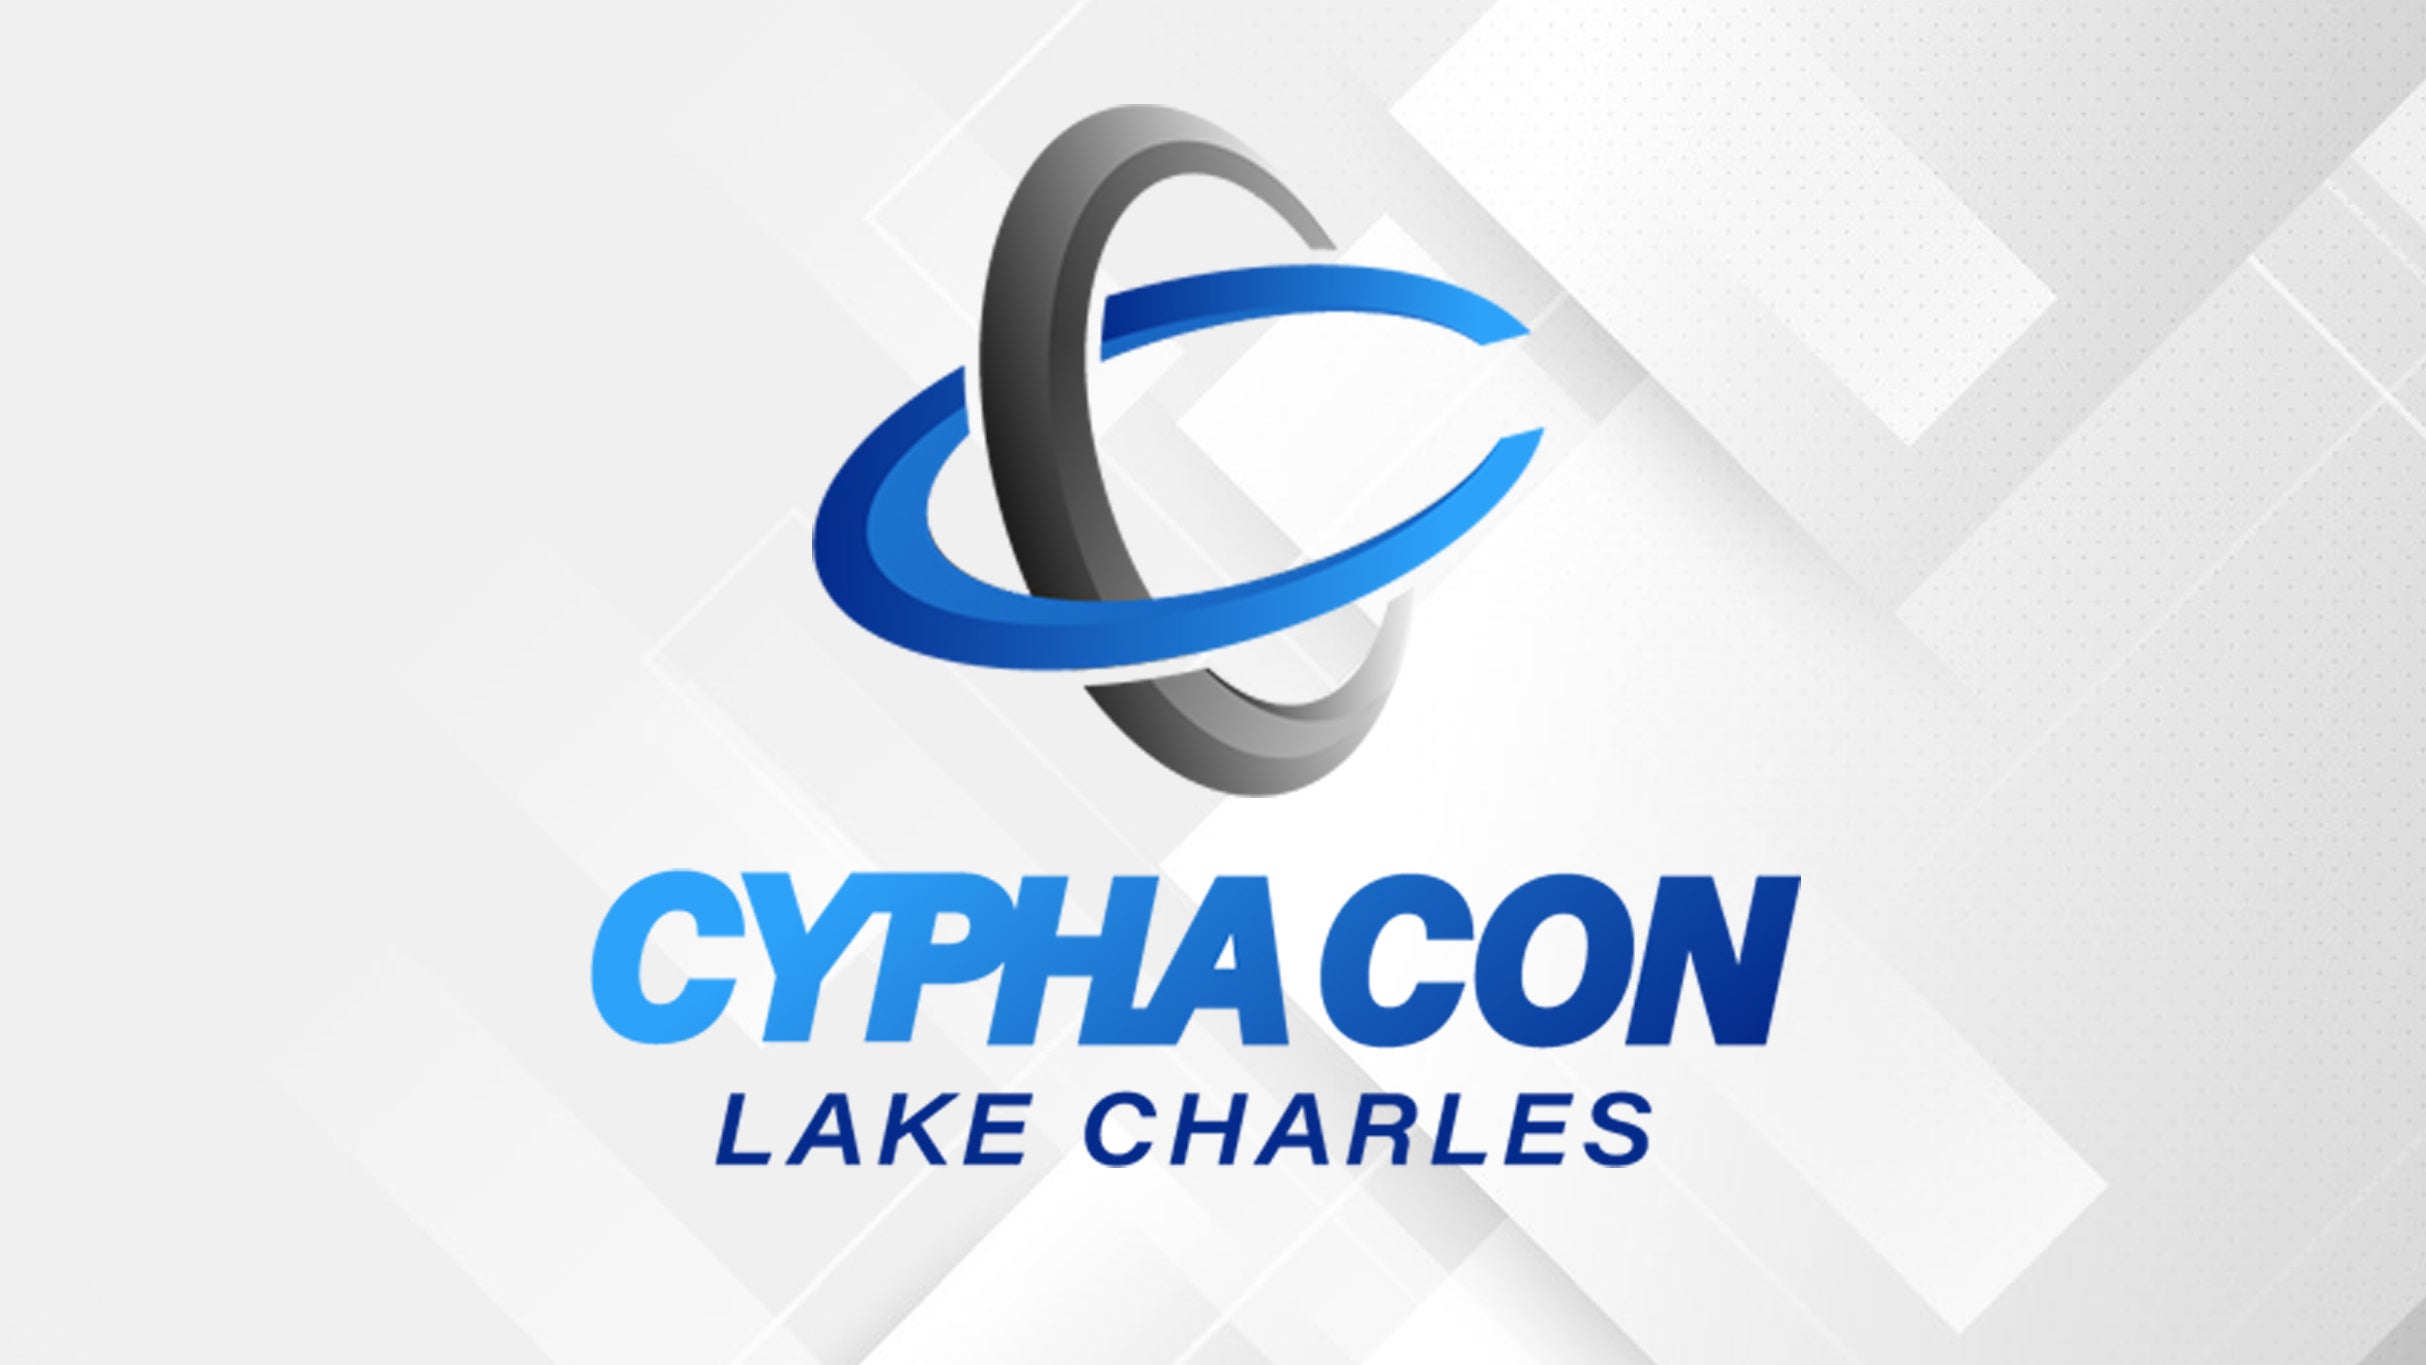 CYPHACON 3 Day Weekend Pass in Lake Charles promo photo for Tier 3 presale offer code